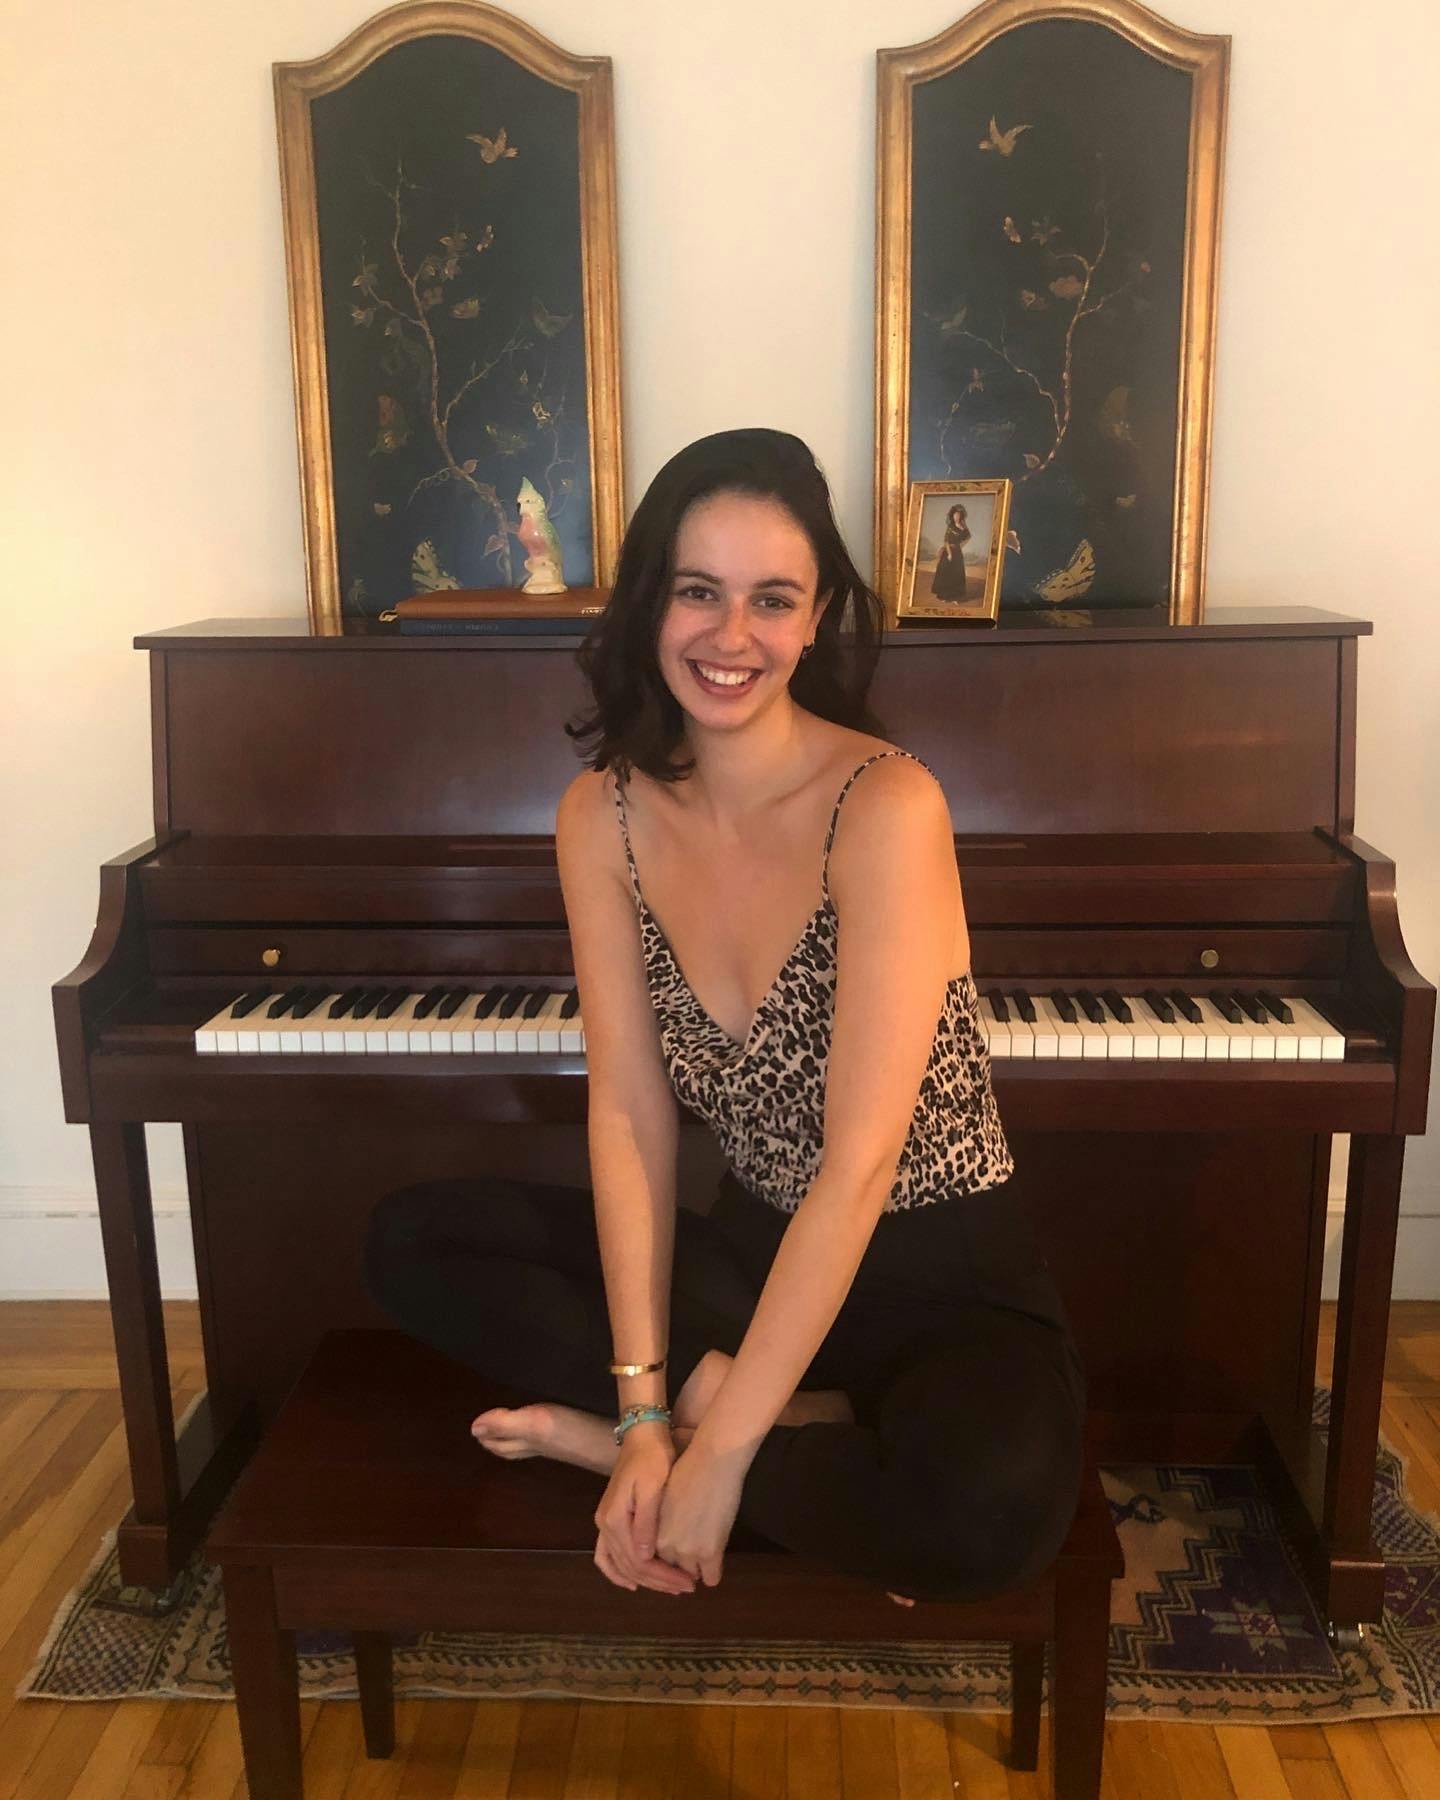 Danielle Iserlis, Email Marketing Manager at Vince, at her piano